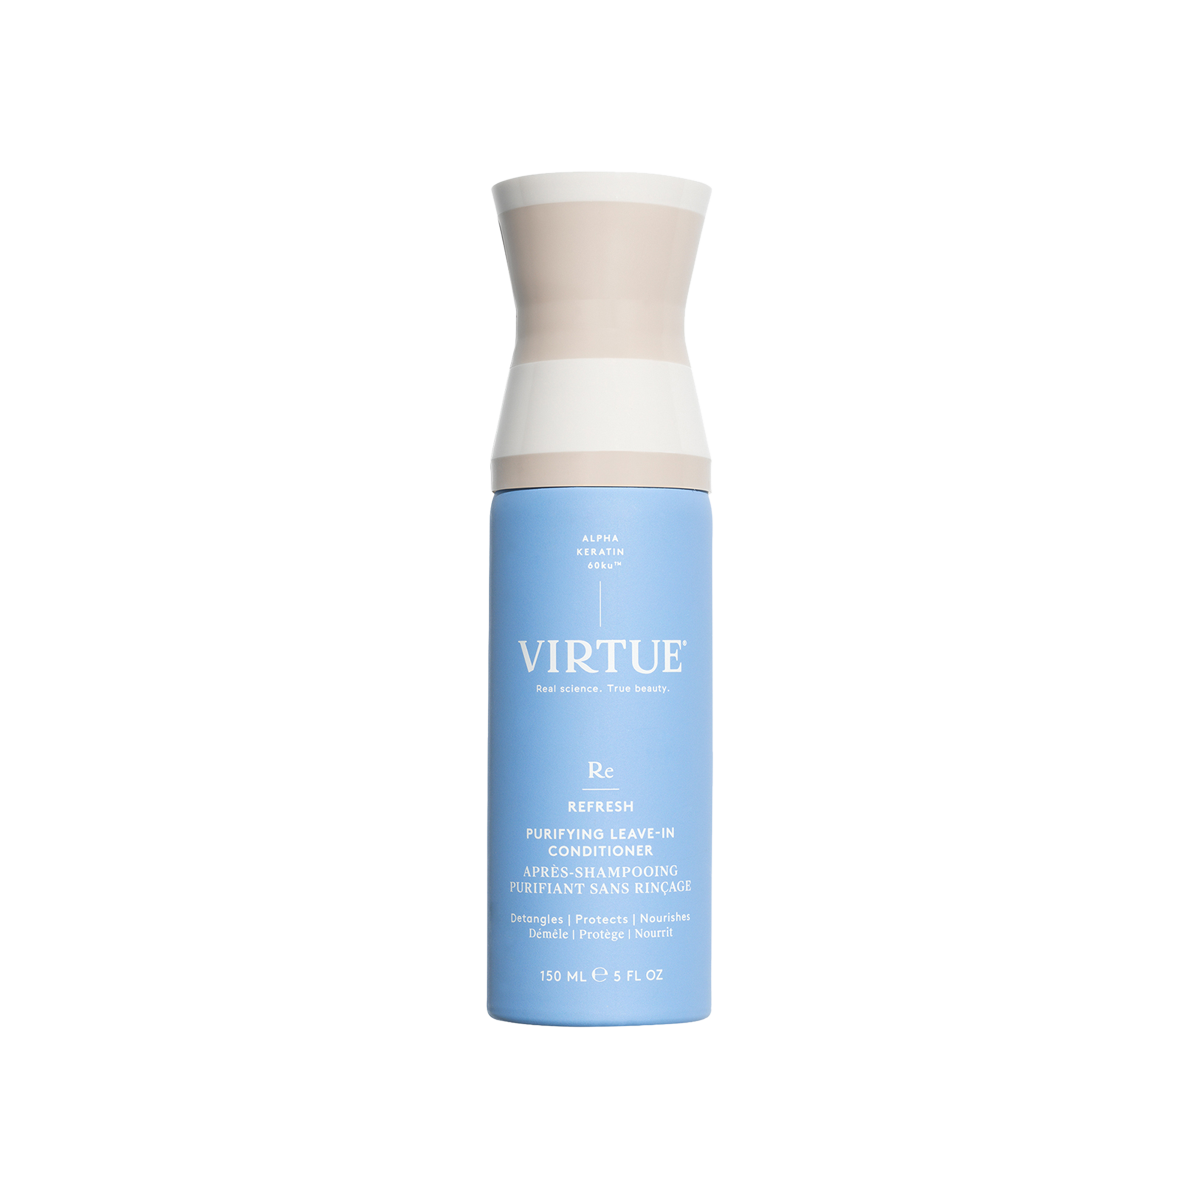 Virtue - Purifying Leave-in Conditioner